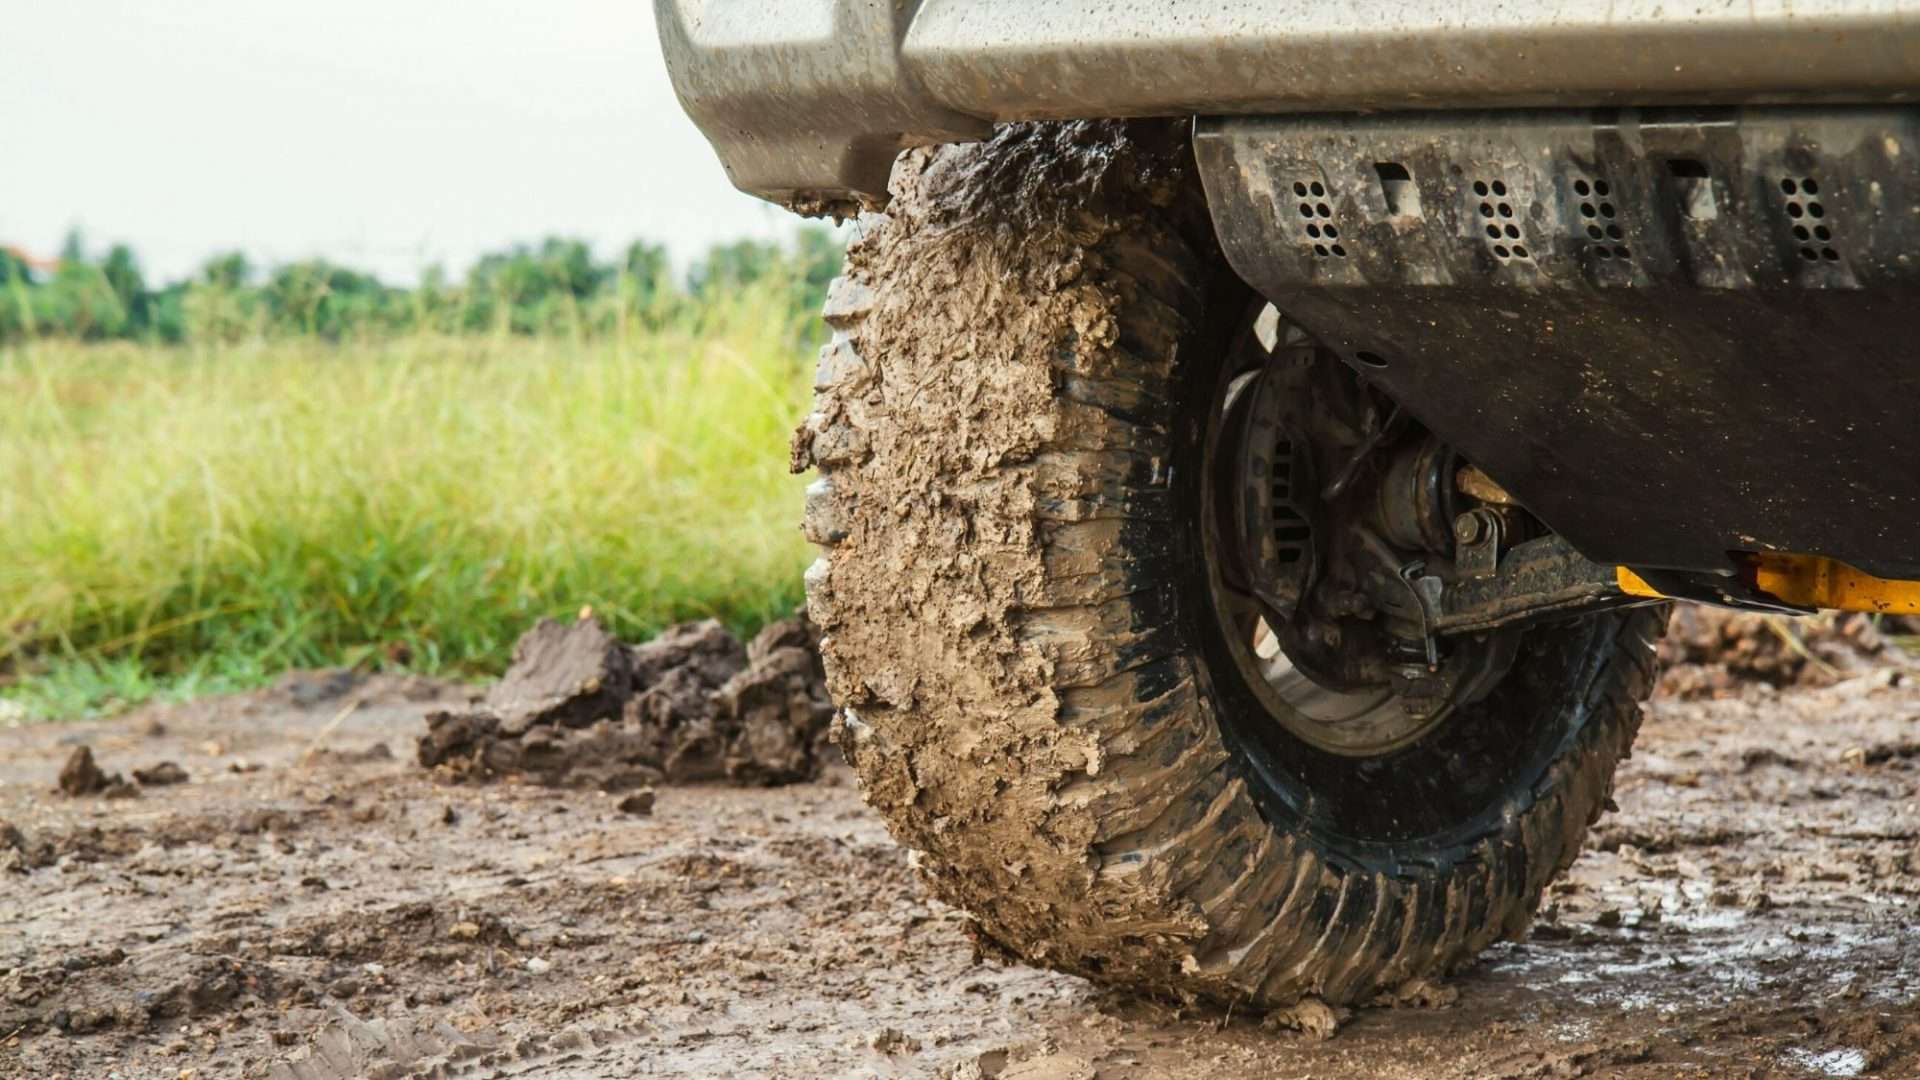 Off-road tire covered in mud